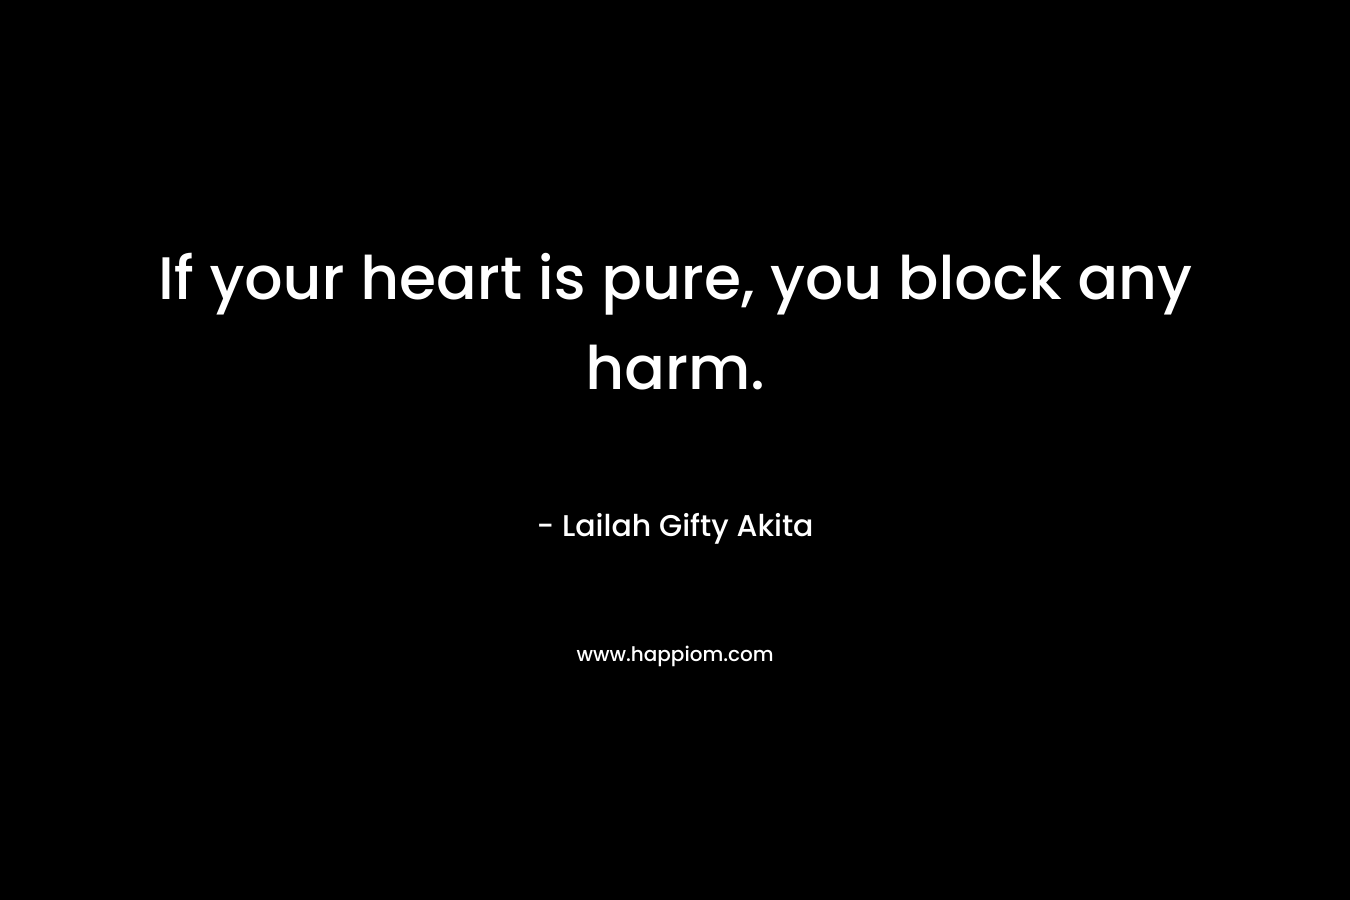 If your heart is pure, you block any harm.